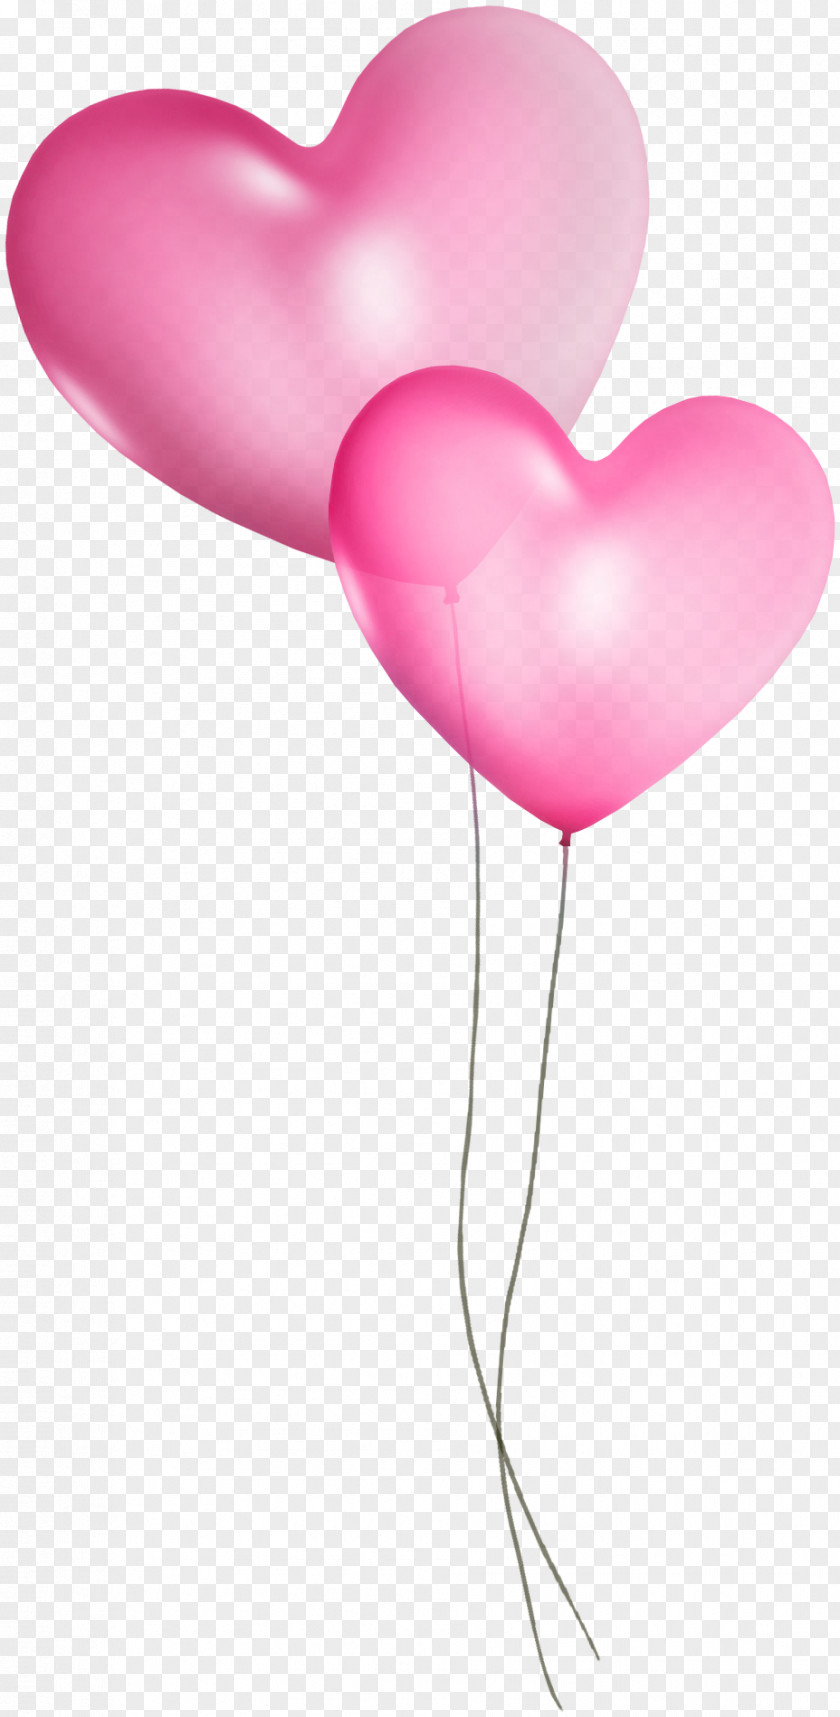 Pink Heart Balloon Blue Turquoise Teal Clip Art PNG